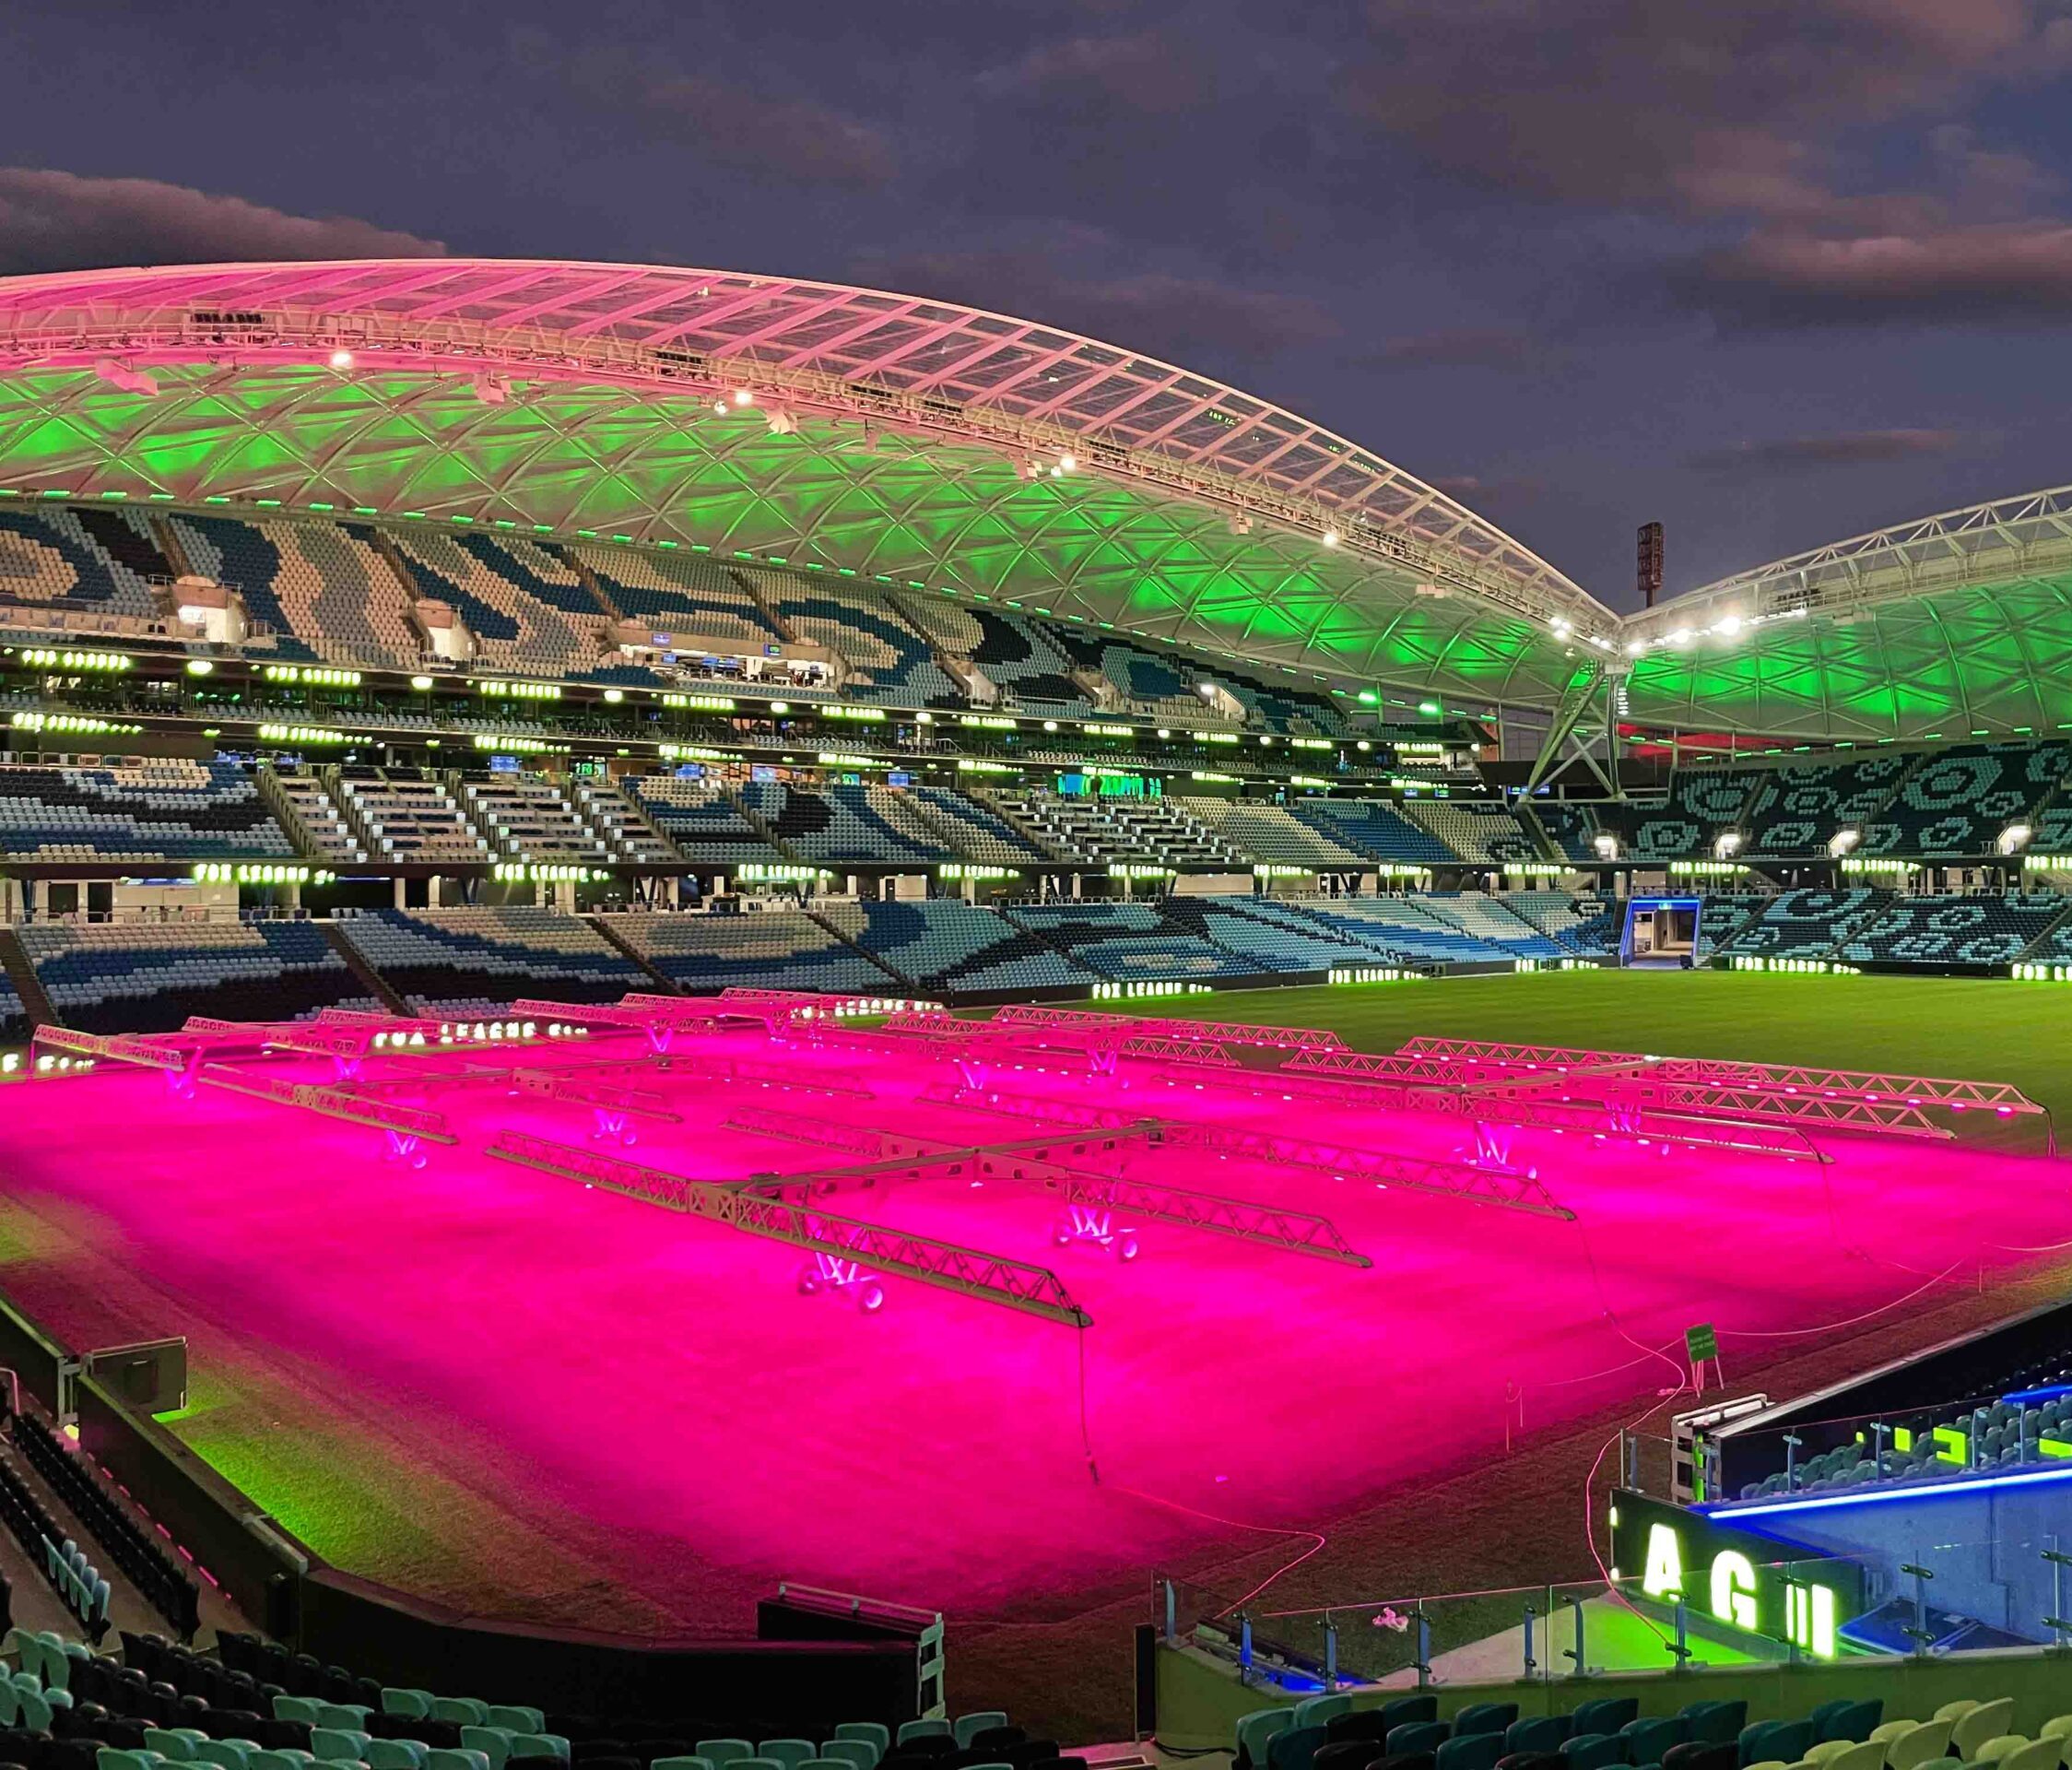 The LED440's on the pitch of Sydney Football Stadium.